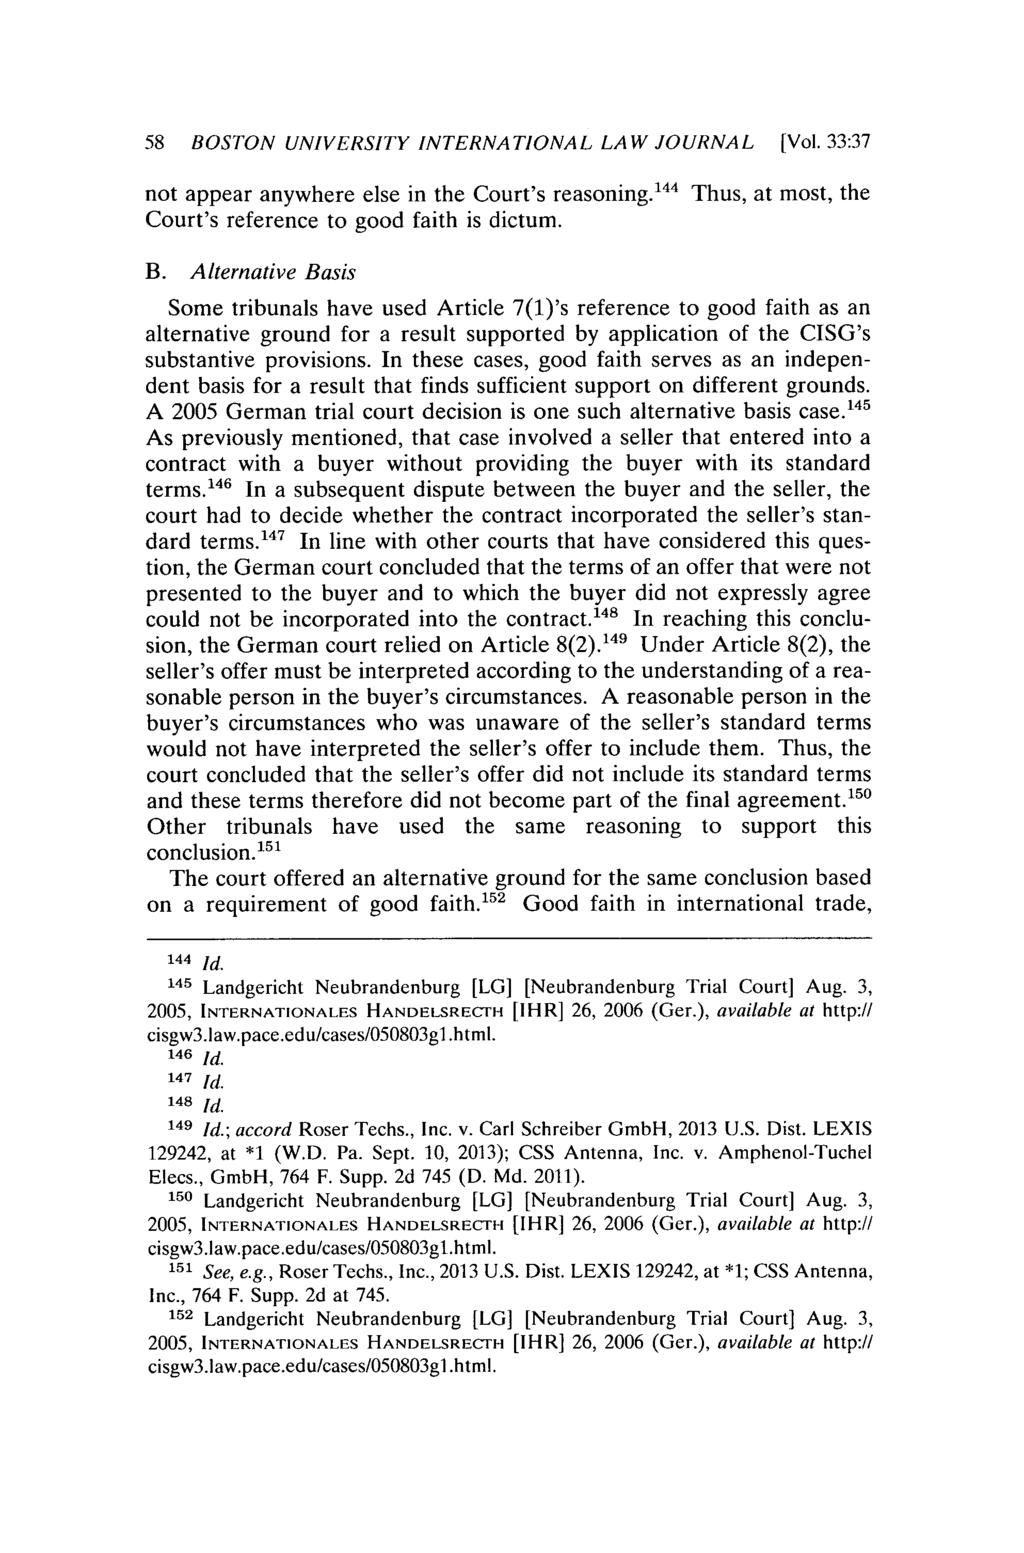 58 BOSTON UNIVERSITY INTERNATIONAL LAW JOURNAL [Vol. 33:37 not appear anywhere else in the Court's reasoning. 14 4 Thus, at most, the Court's reference to good faith is dictum. B. Alternative Basis Some tribunals have used Article 7(1)'s reference to good faith as an alternative ground for a result supported by application of the CISG's substantive provisions.